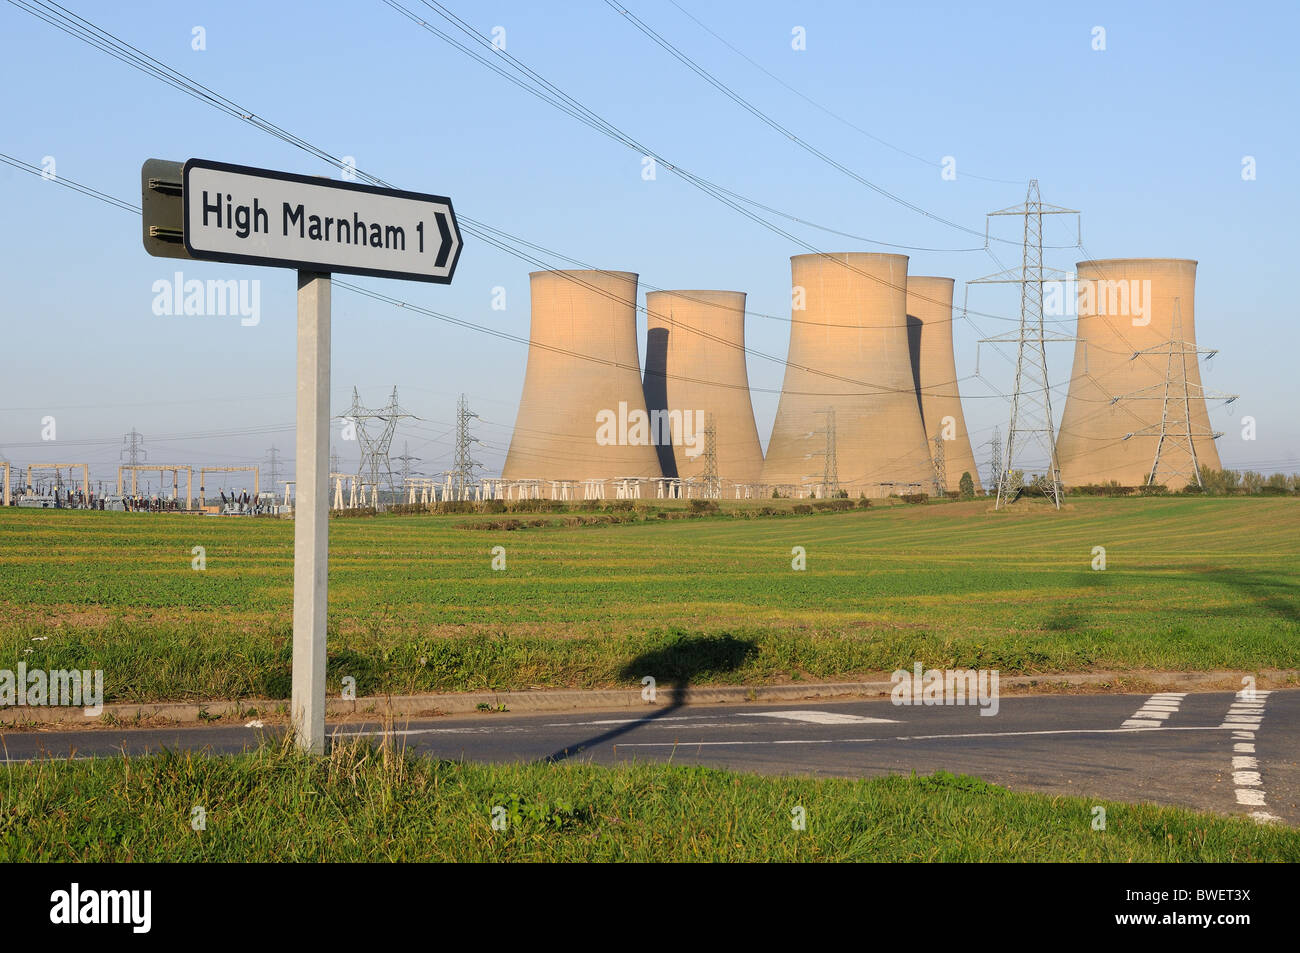 The cooling towers of the former High Marnham Power Station, in High Marnham, Nottinghamshire, England Stock Photo